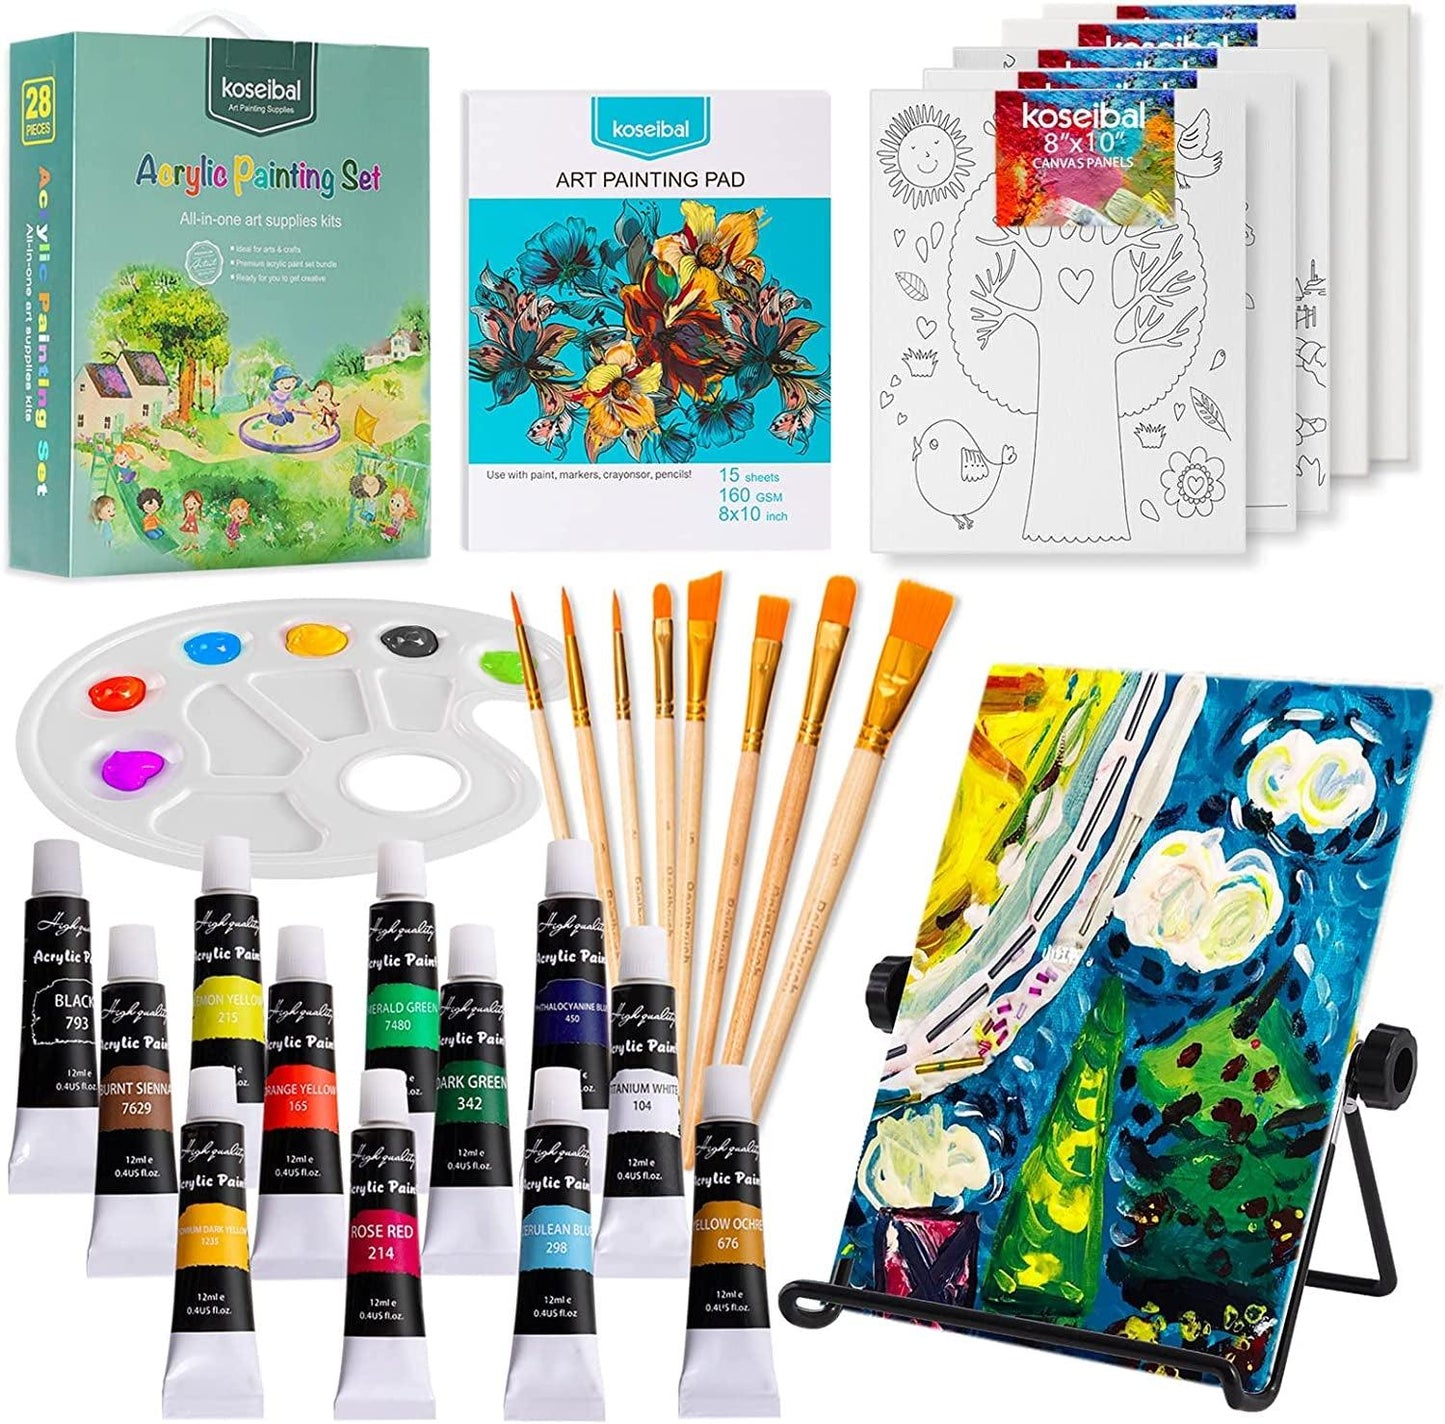 Acrylic Paint Set for Kids, Art Painting Supplies Kit with 12